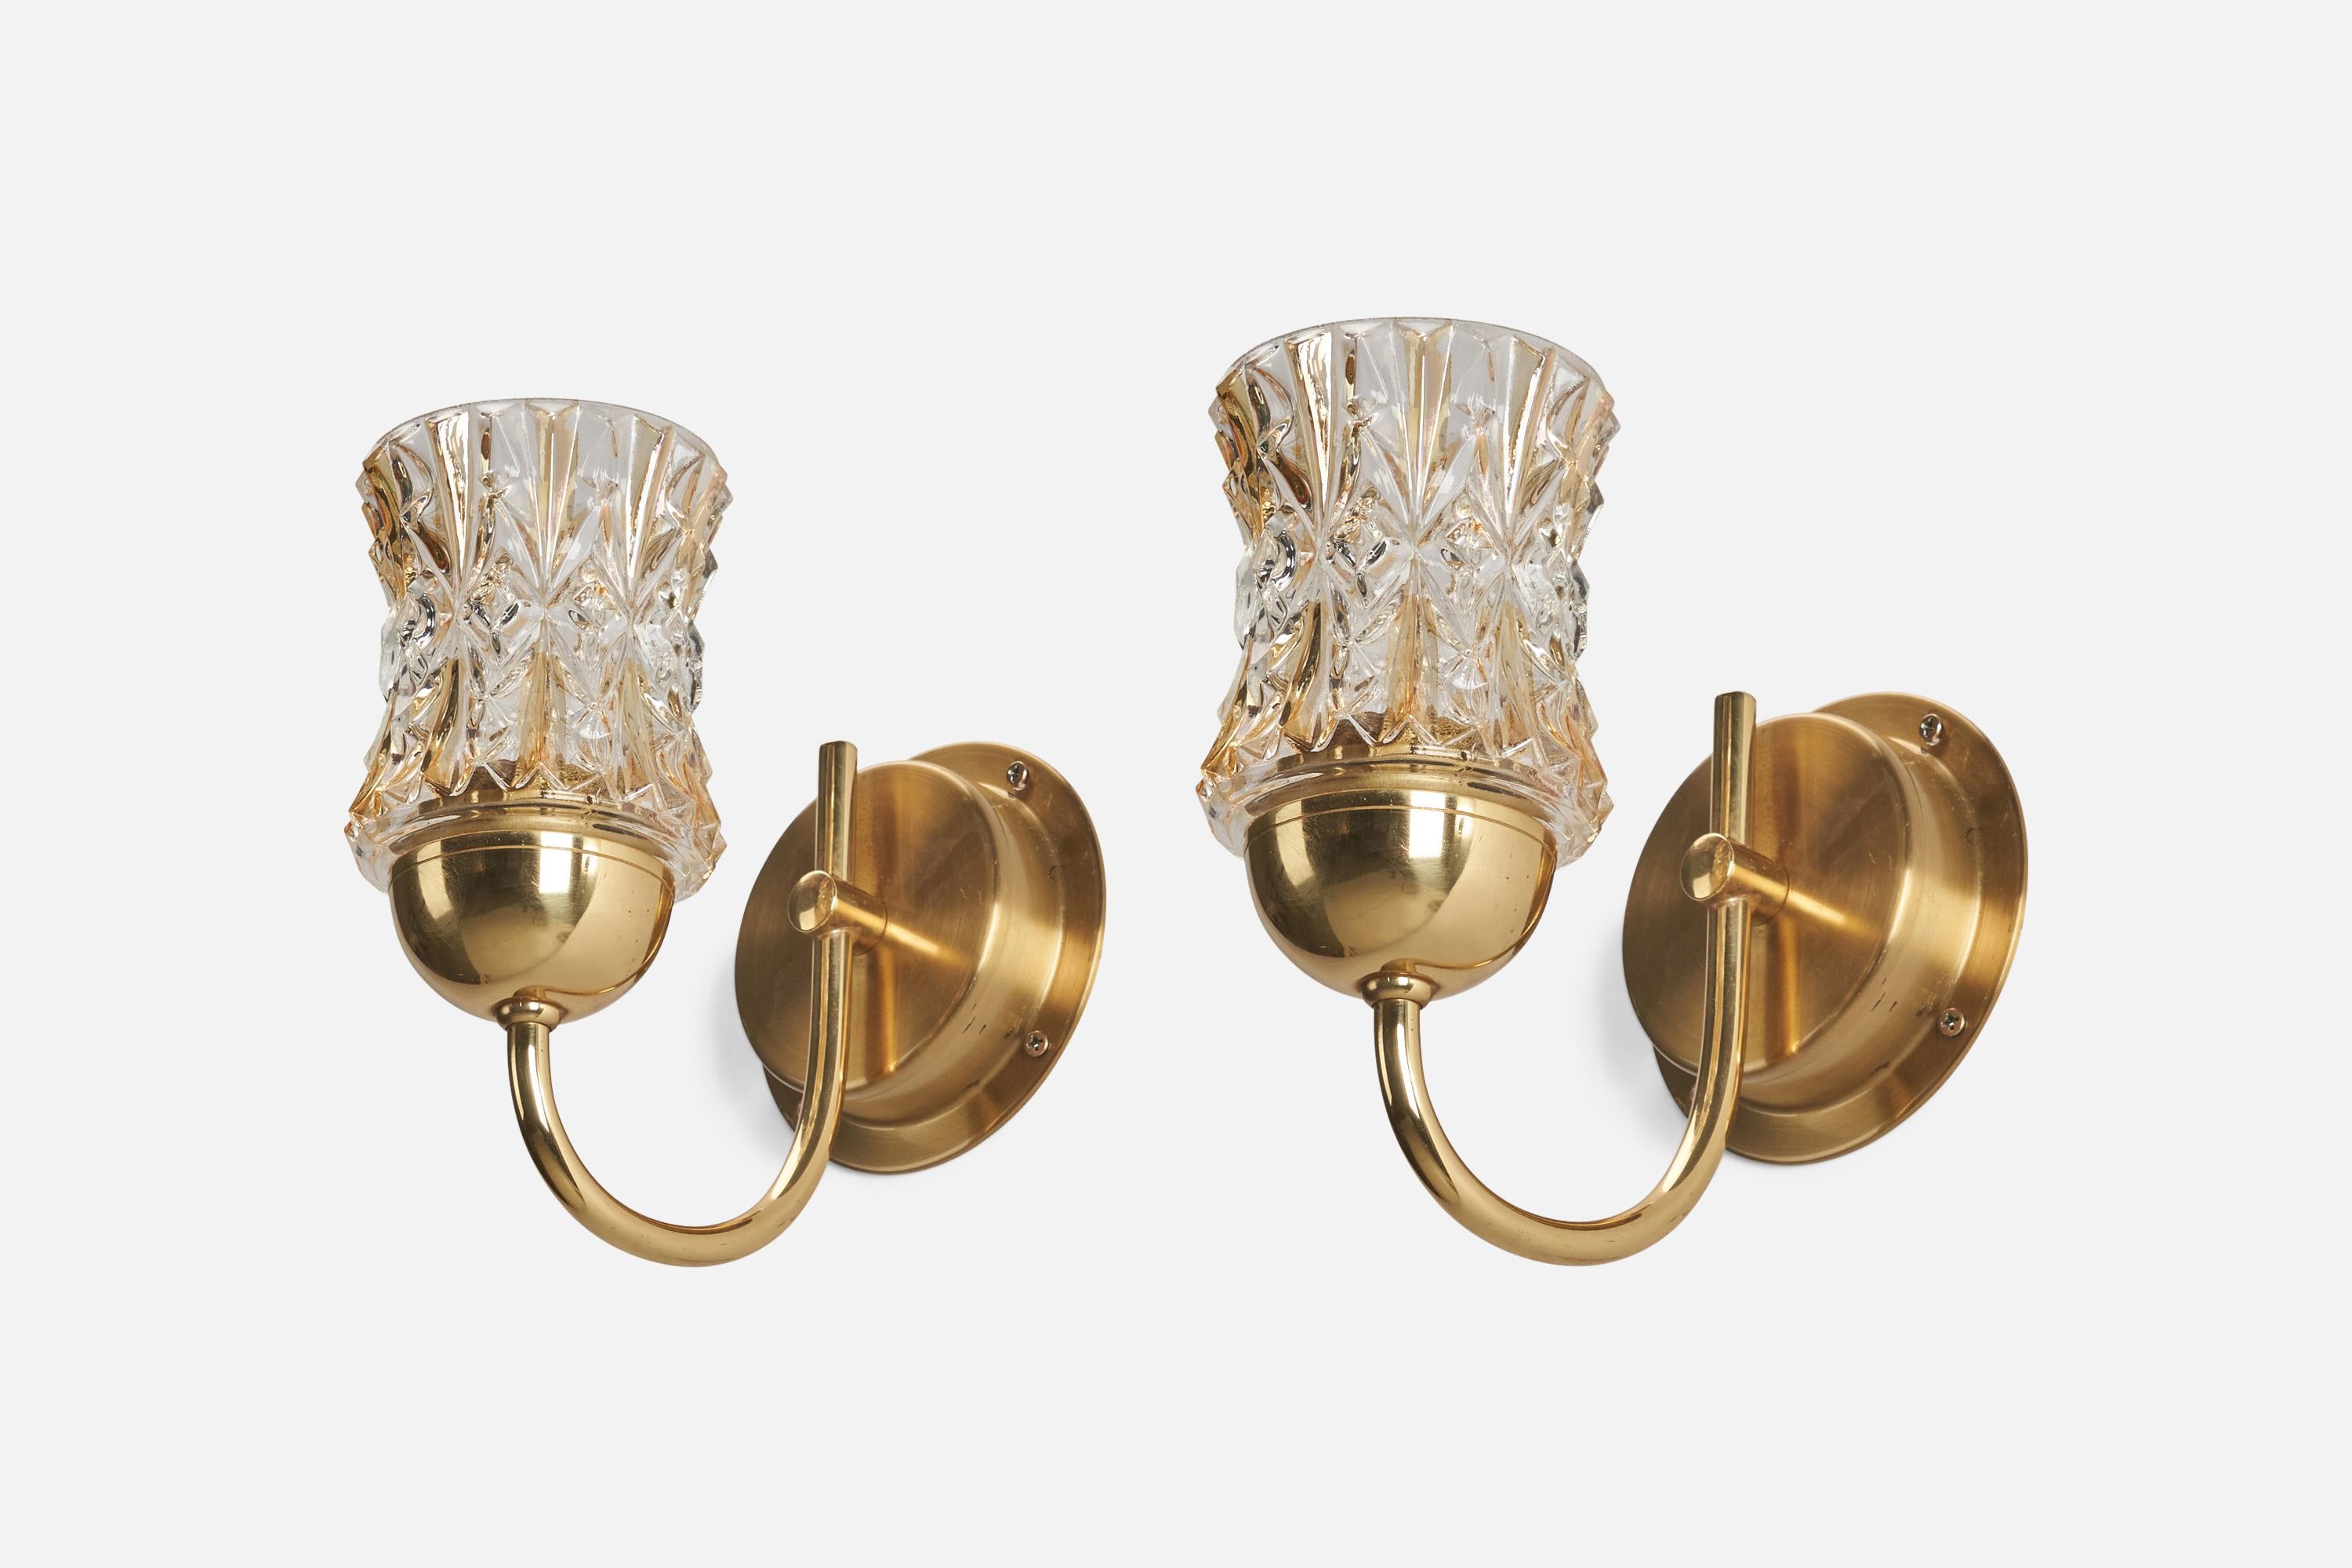 A pair of brass and glass wall lights designed and produced by Ewå Värnamo, Sweden, 1960s.